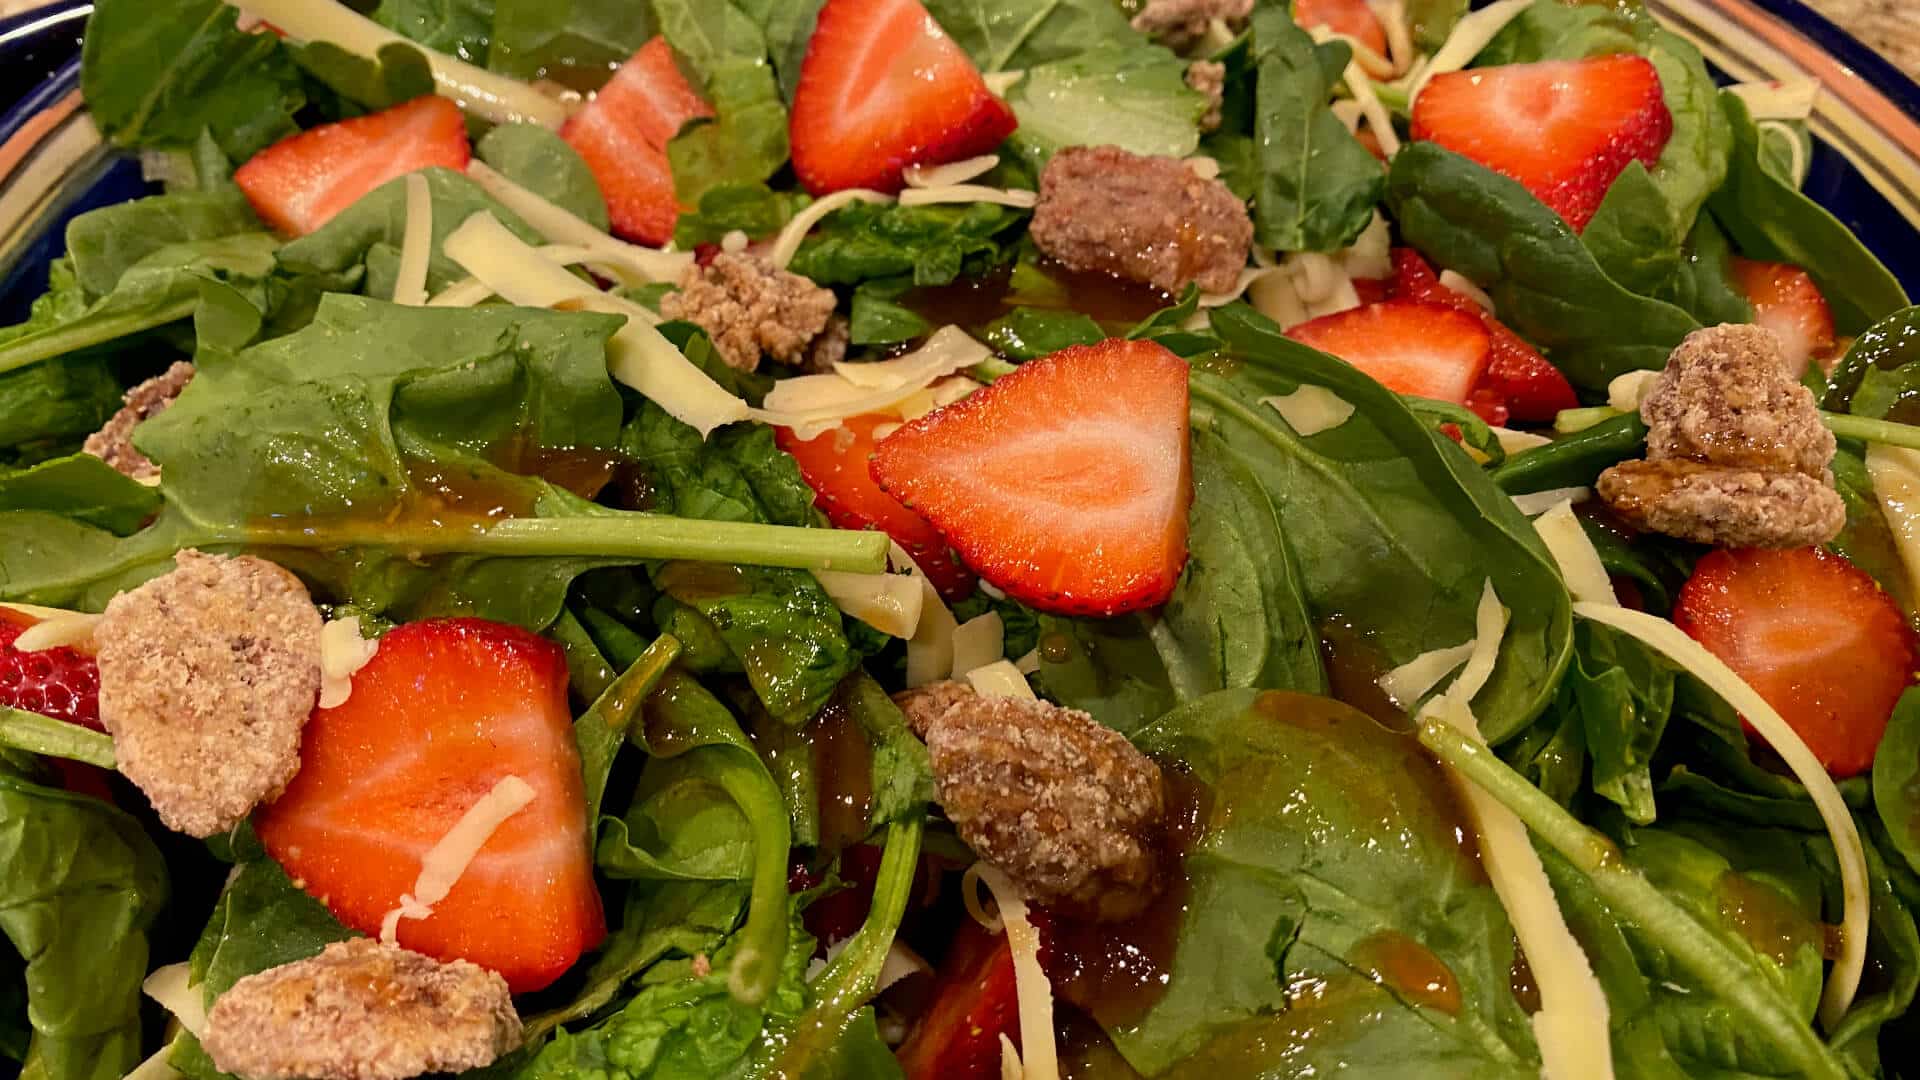 A salad with fresh spinach leaves, strawberry slices, grated Monterey Jack cheese, candied pecans, and a raspberry vinaigrette dressing